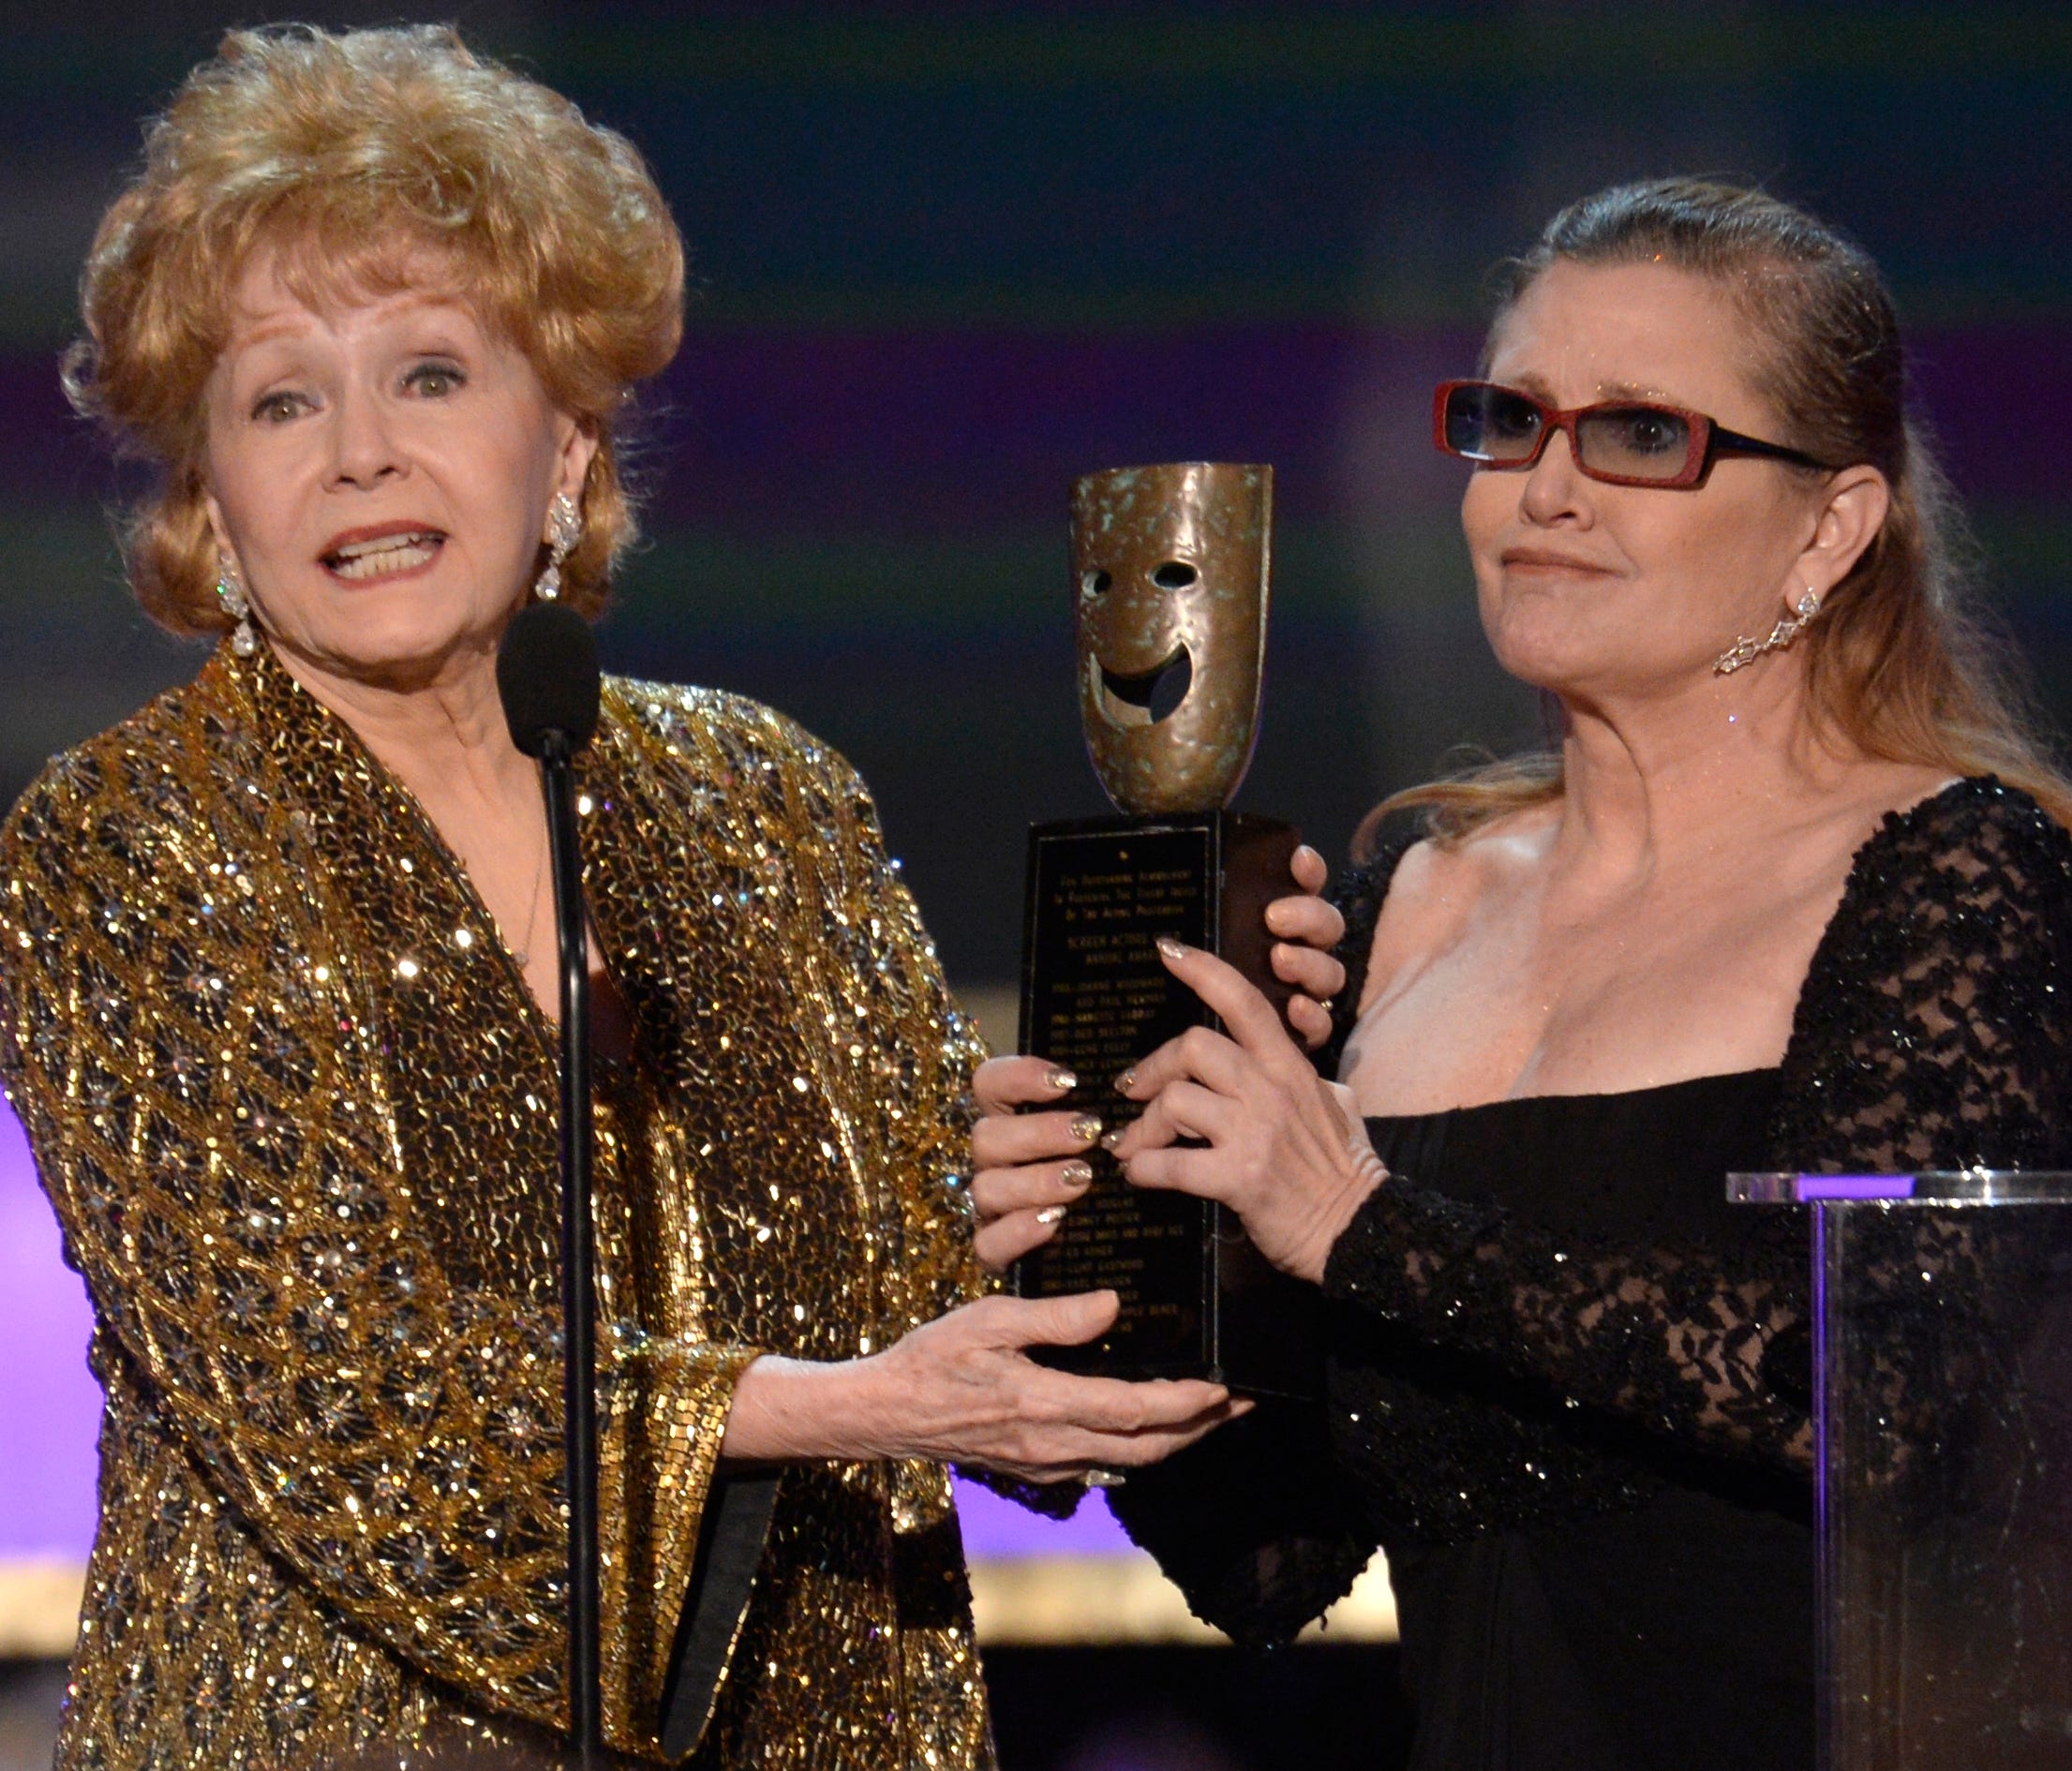 1/25/15 6:06:35 PM -- Los Angeles, CA, U.S.A  -- Carrie Fisher presents the Screen Actors Guild Annual Life Achievement Award to her mother Debbie Reynolds during the 21st Screen Actors Guild Awards at the Shrine Auditorium in Los Angeles, CA     Pho